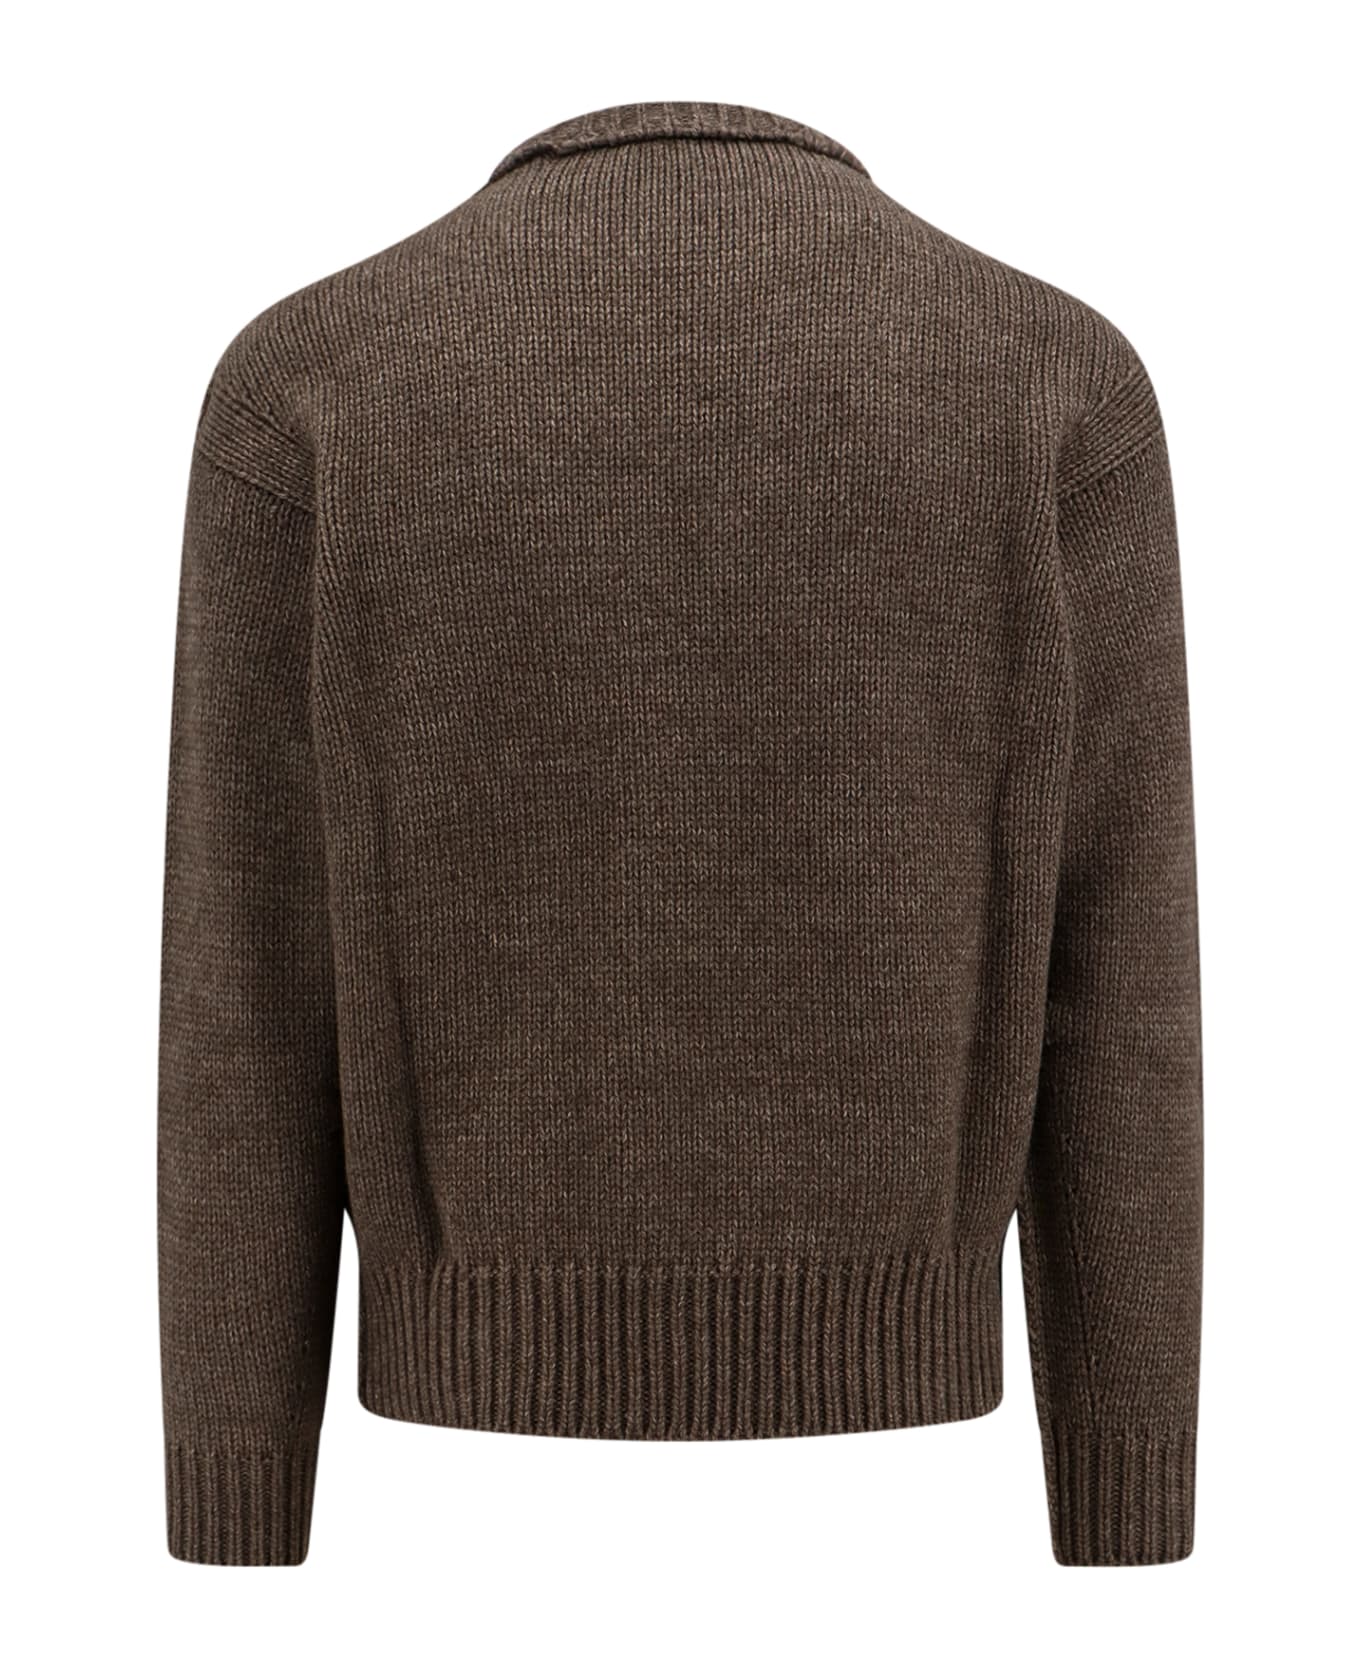 Lemaire Sweater - Grey